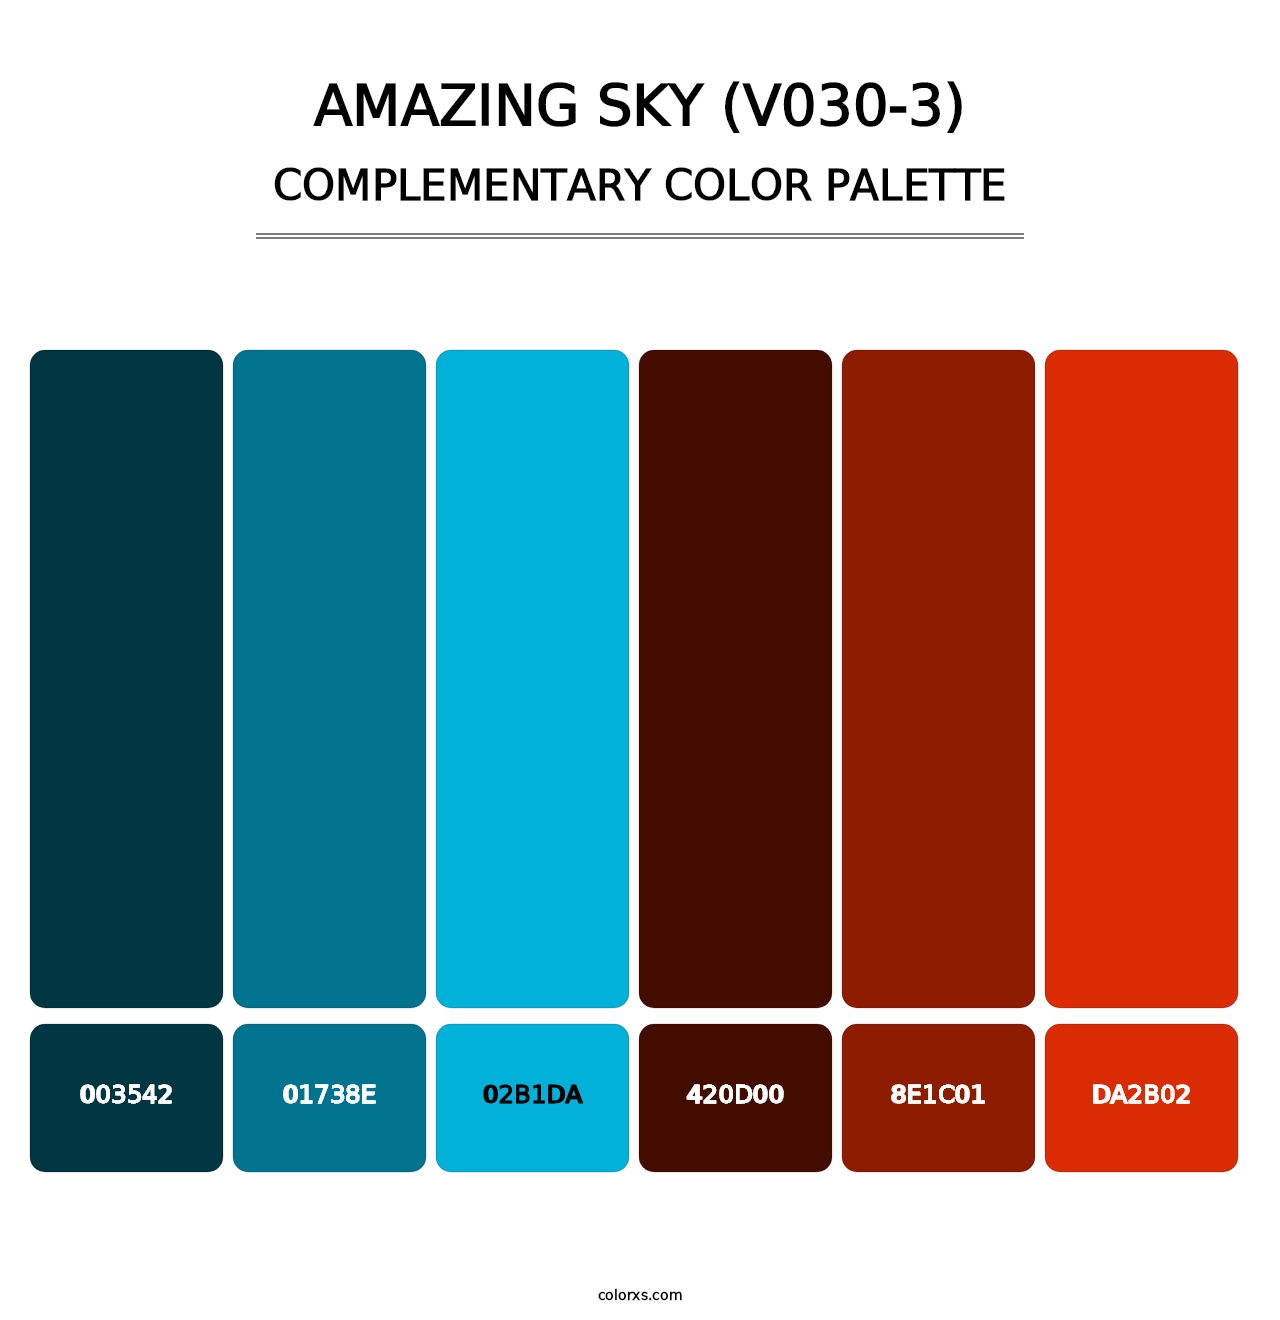 Amazing Sky (V030-3) - Complementary Color Palette